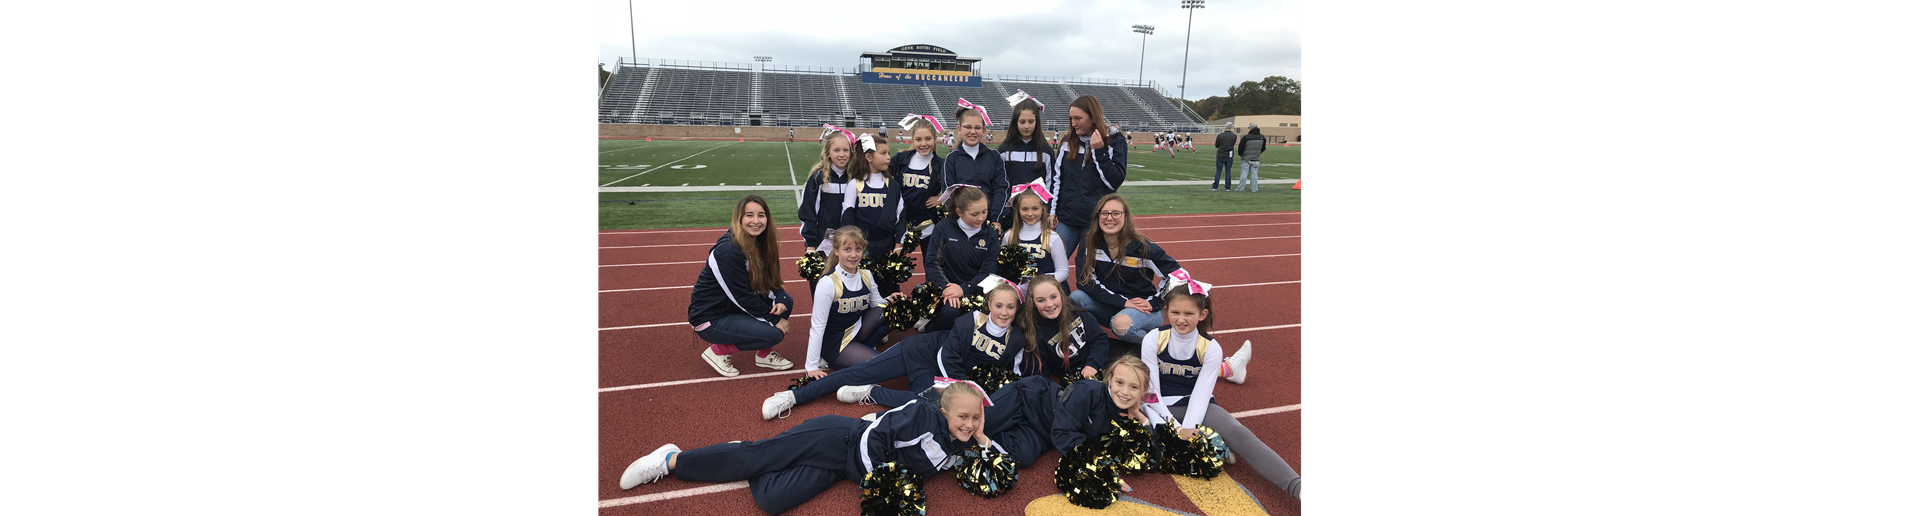 Grand Haven Young Bucs Cheer